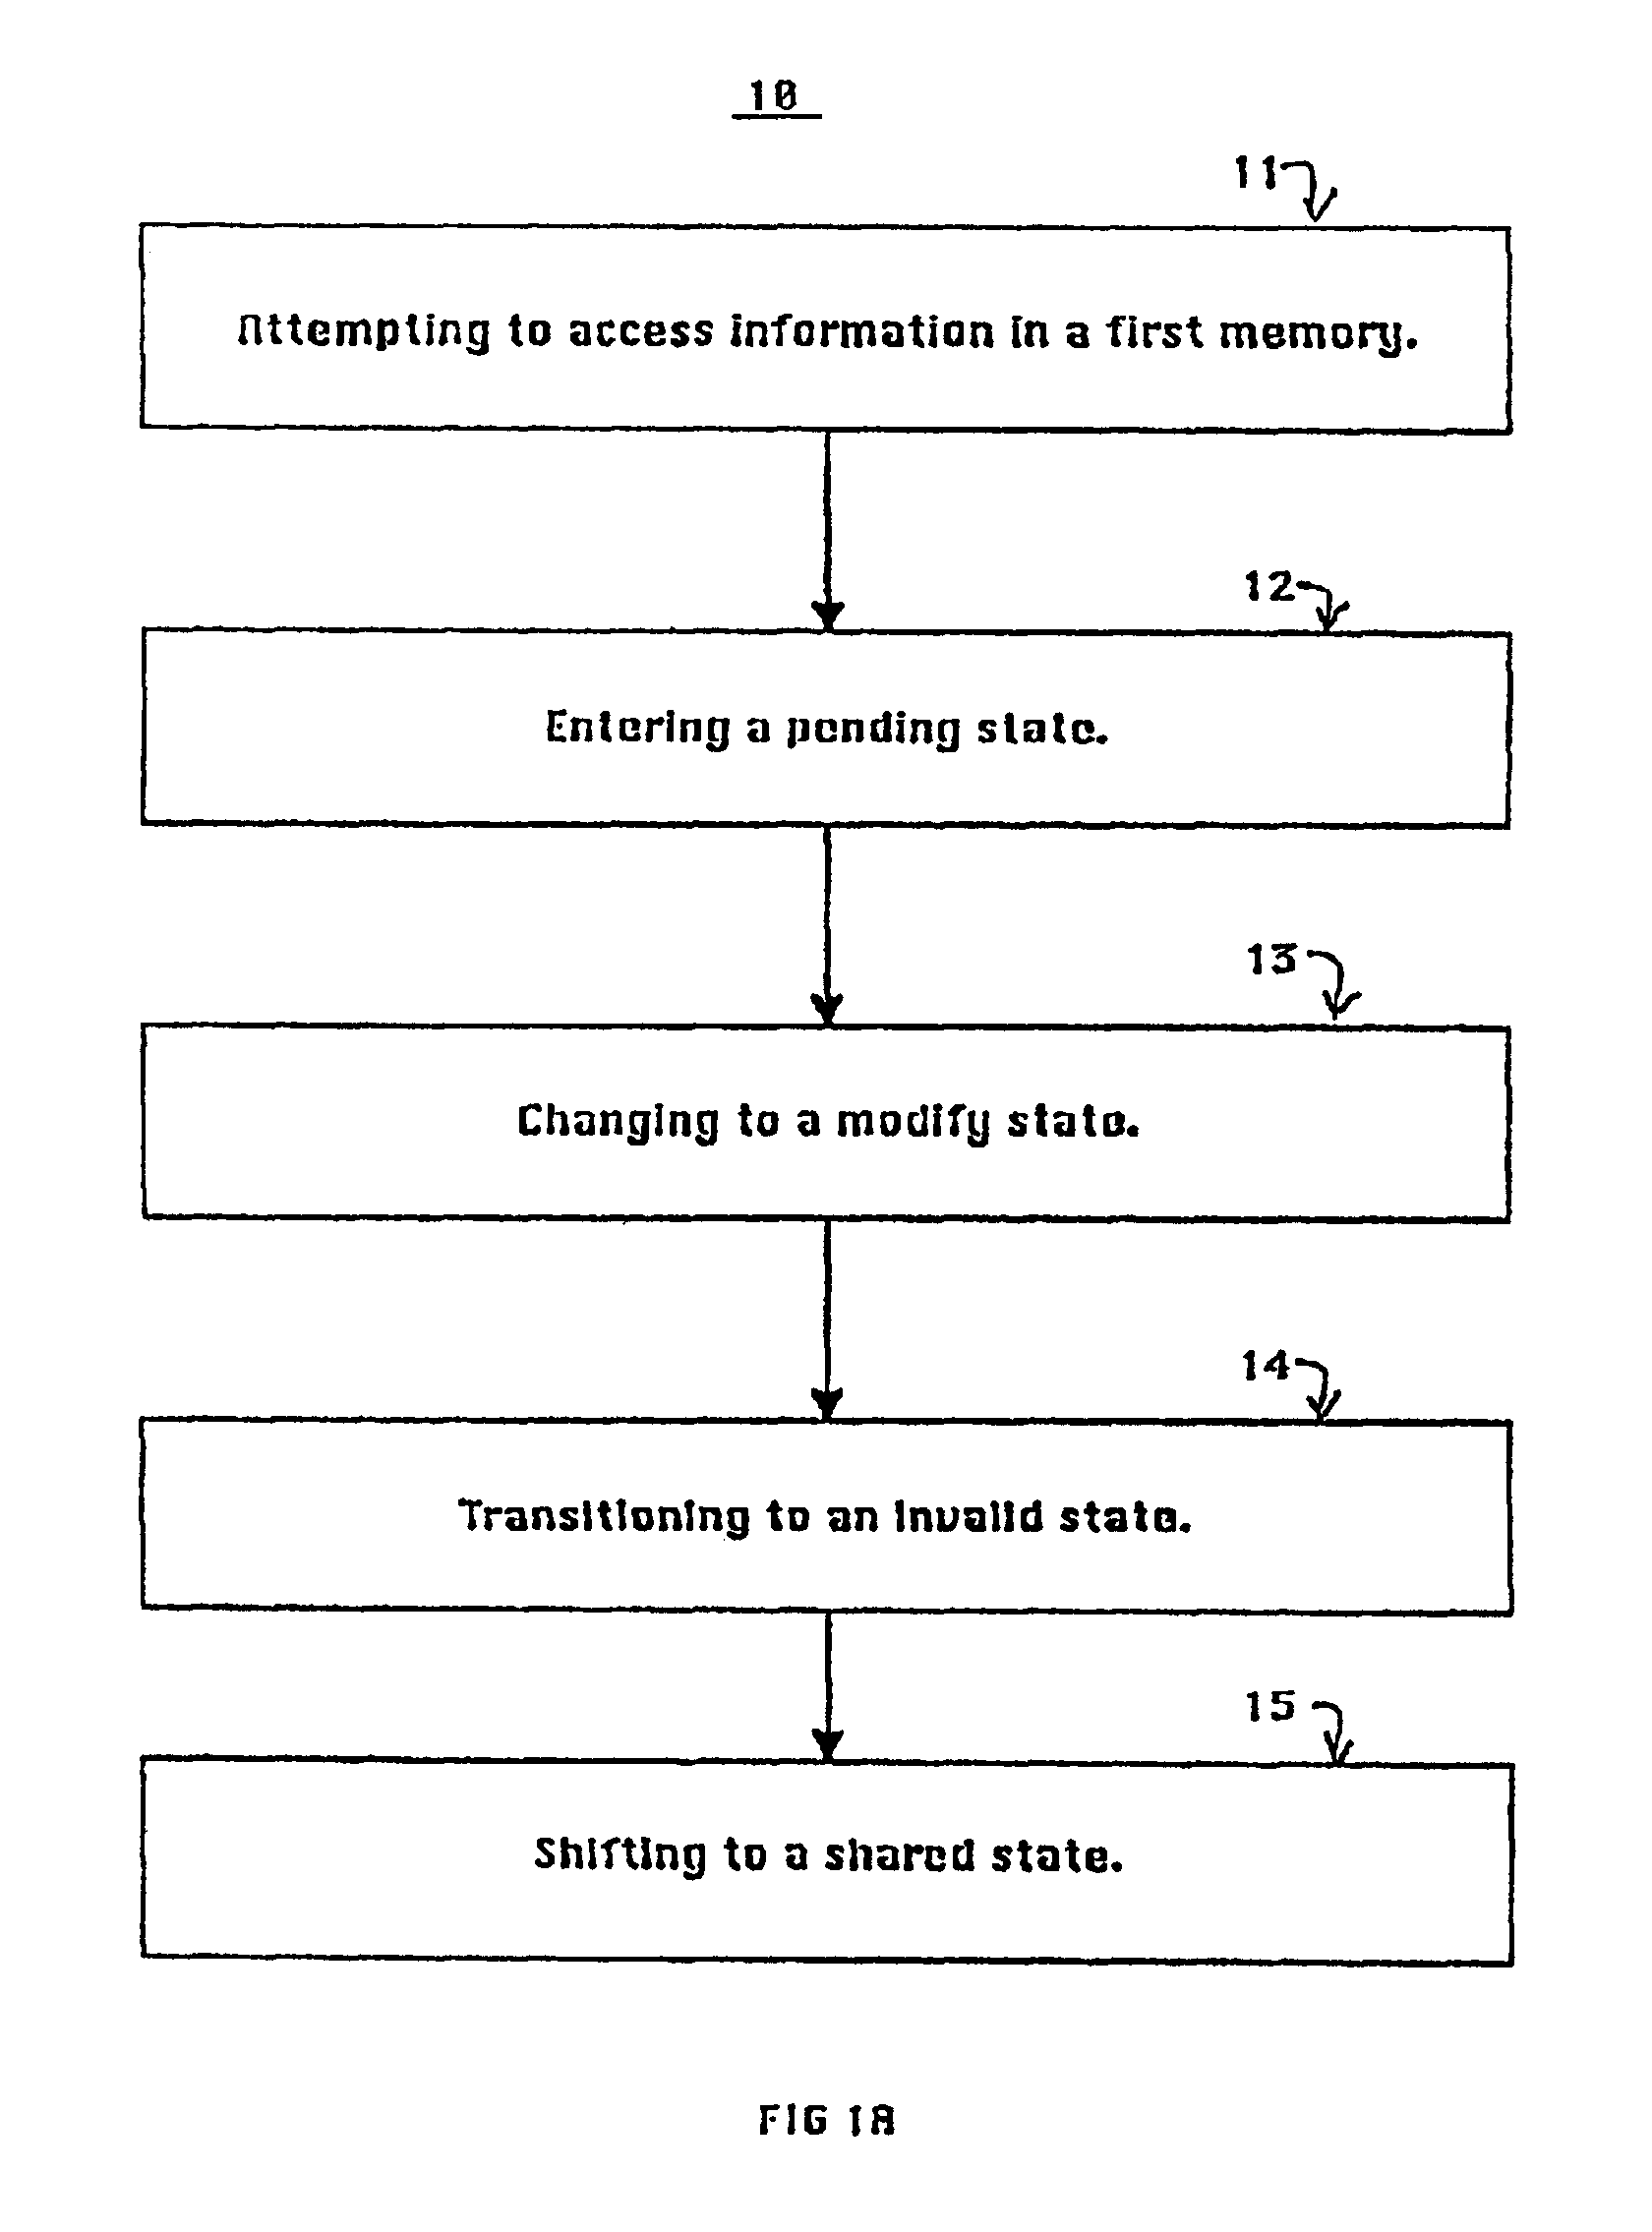 Streamlined cache coherency protocol system and method for a multiple processor single chip device